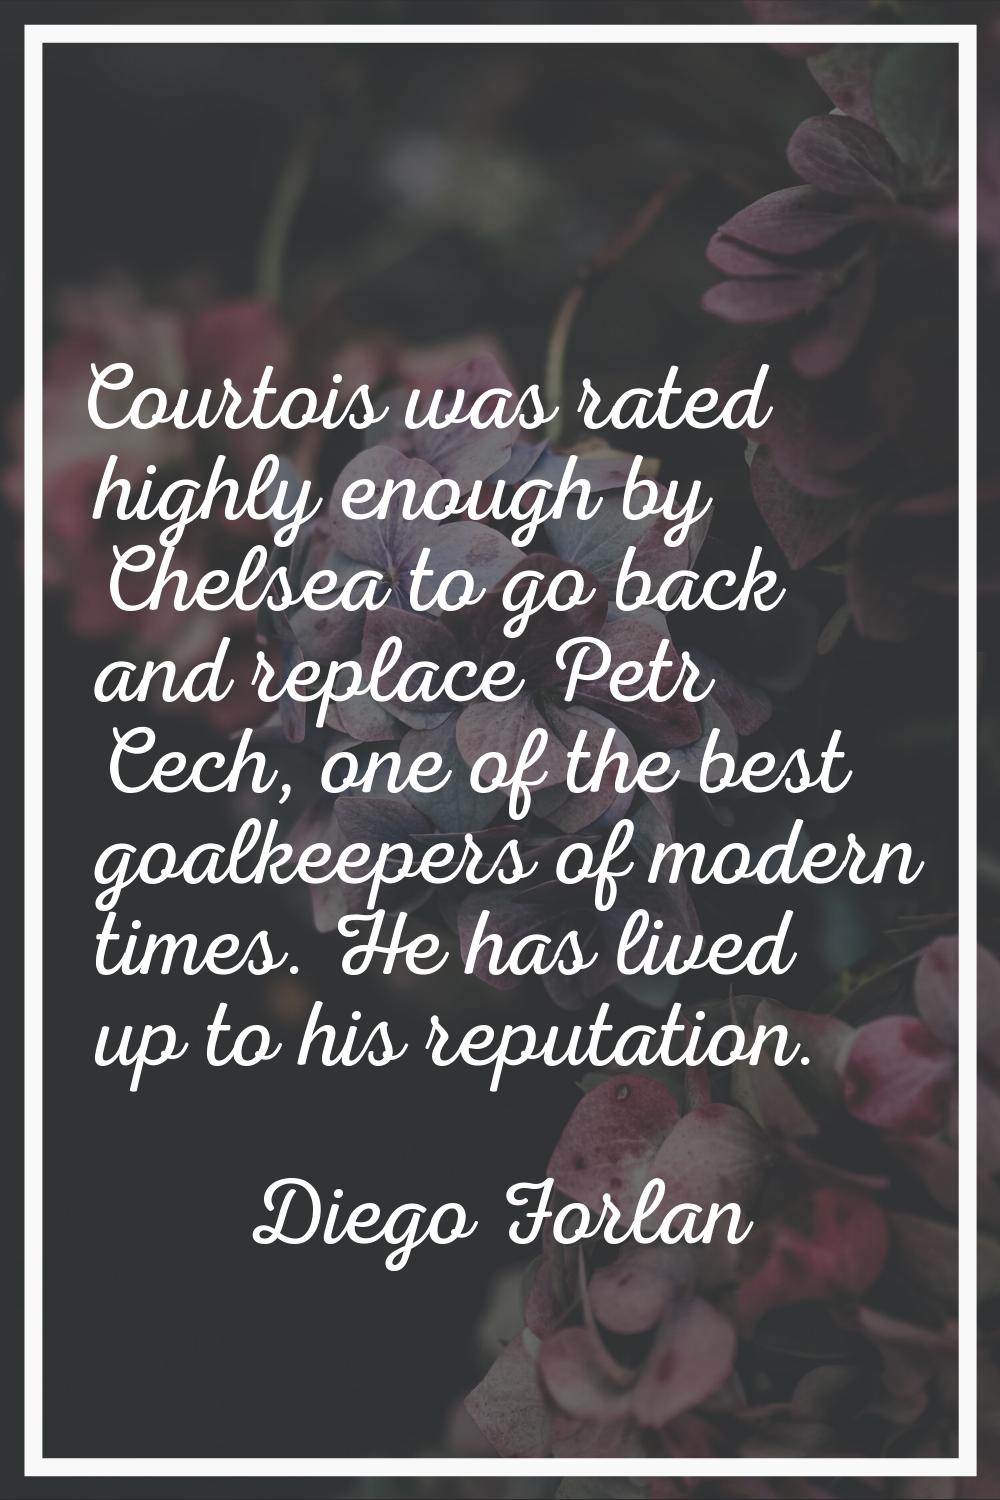 Courtois was rated highly enough by Chelsea to go back and replace Petr Cech, one of the best goalk